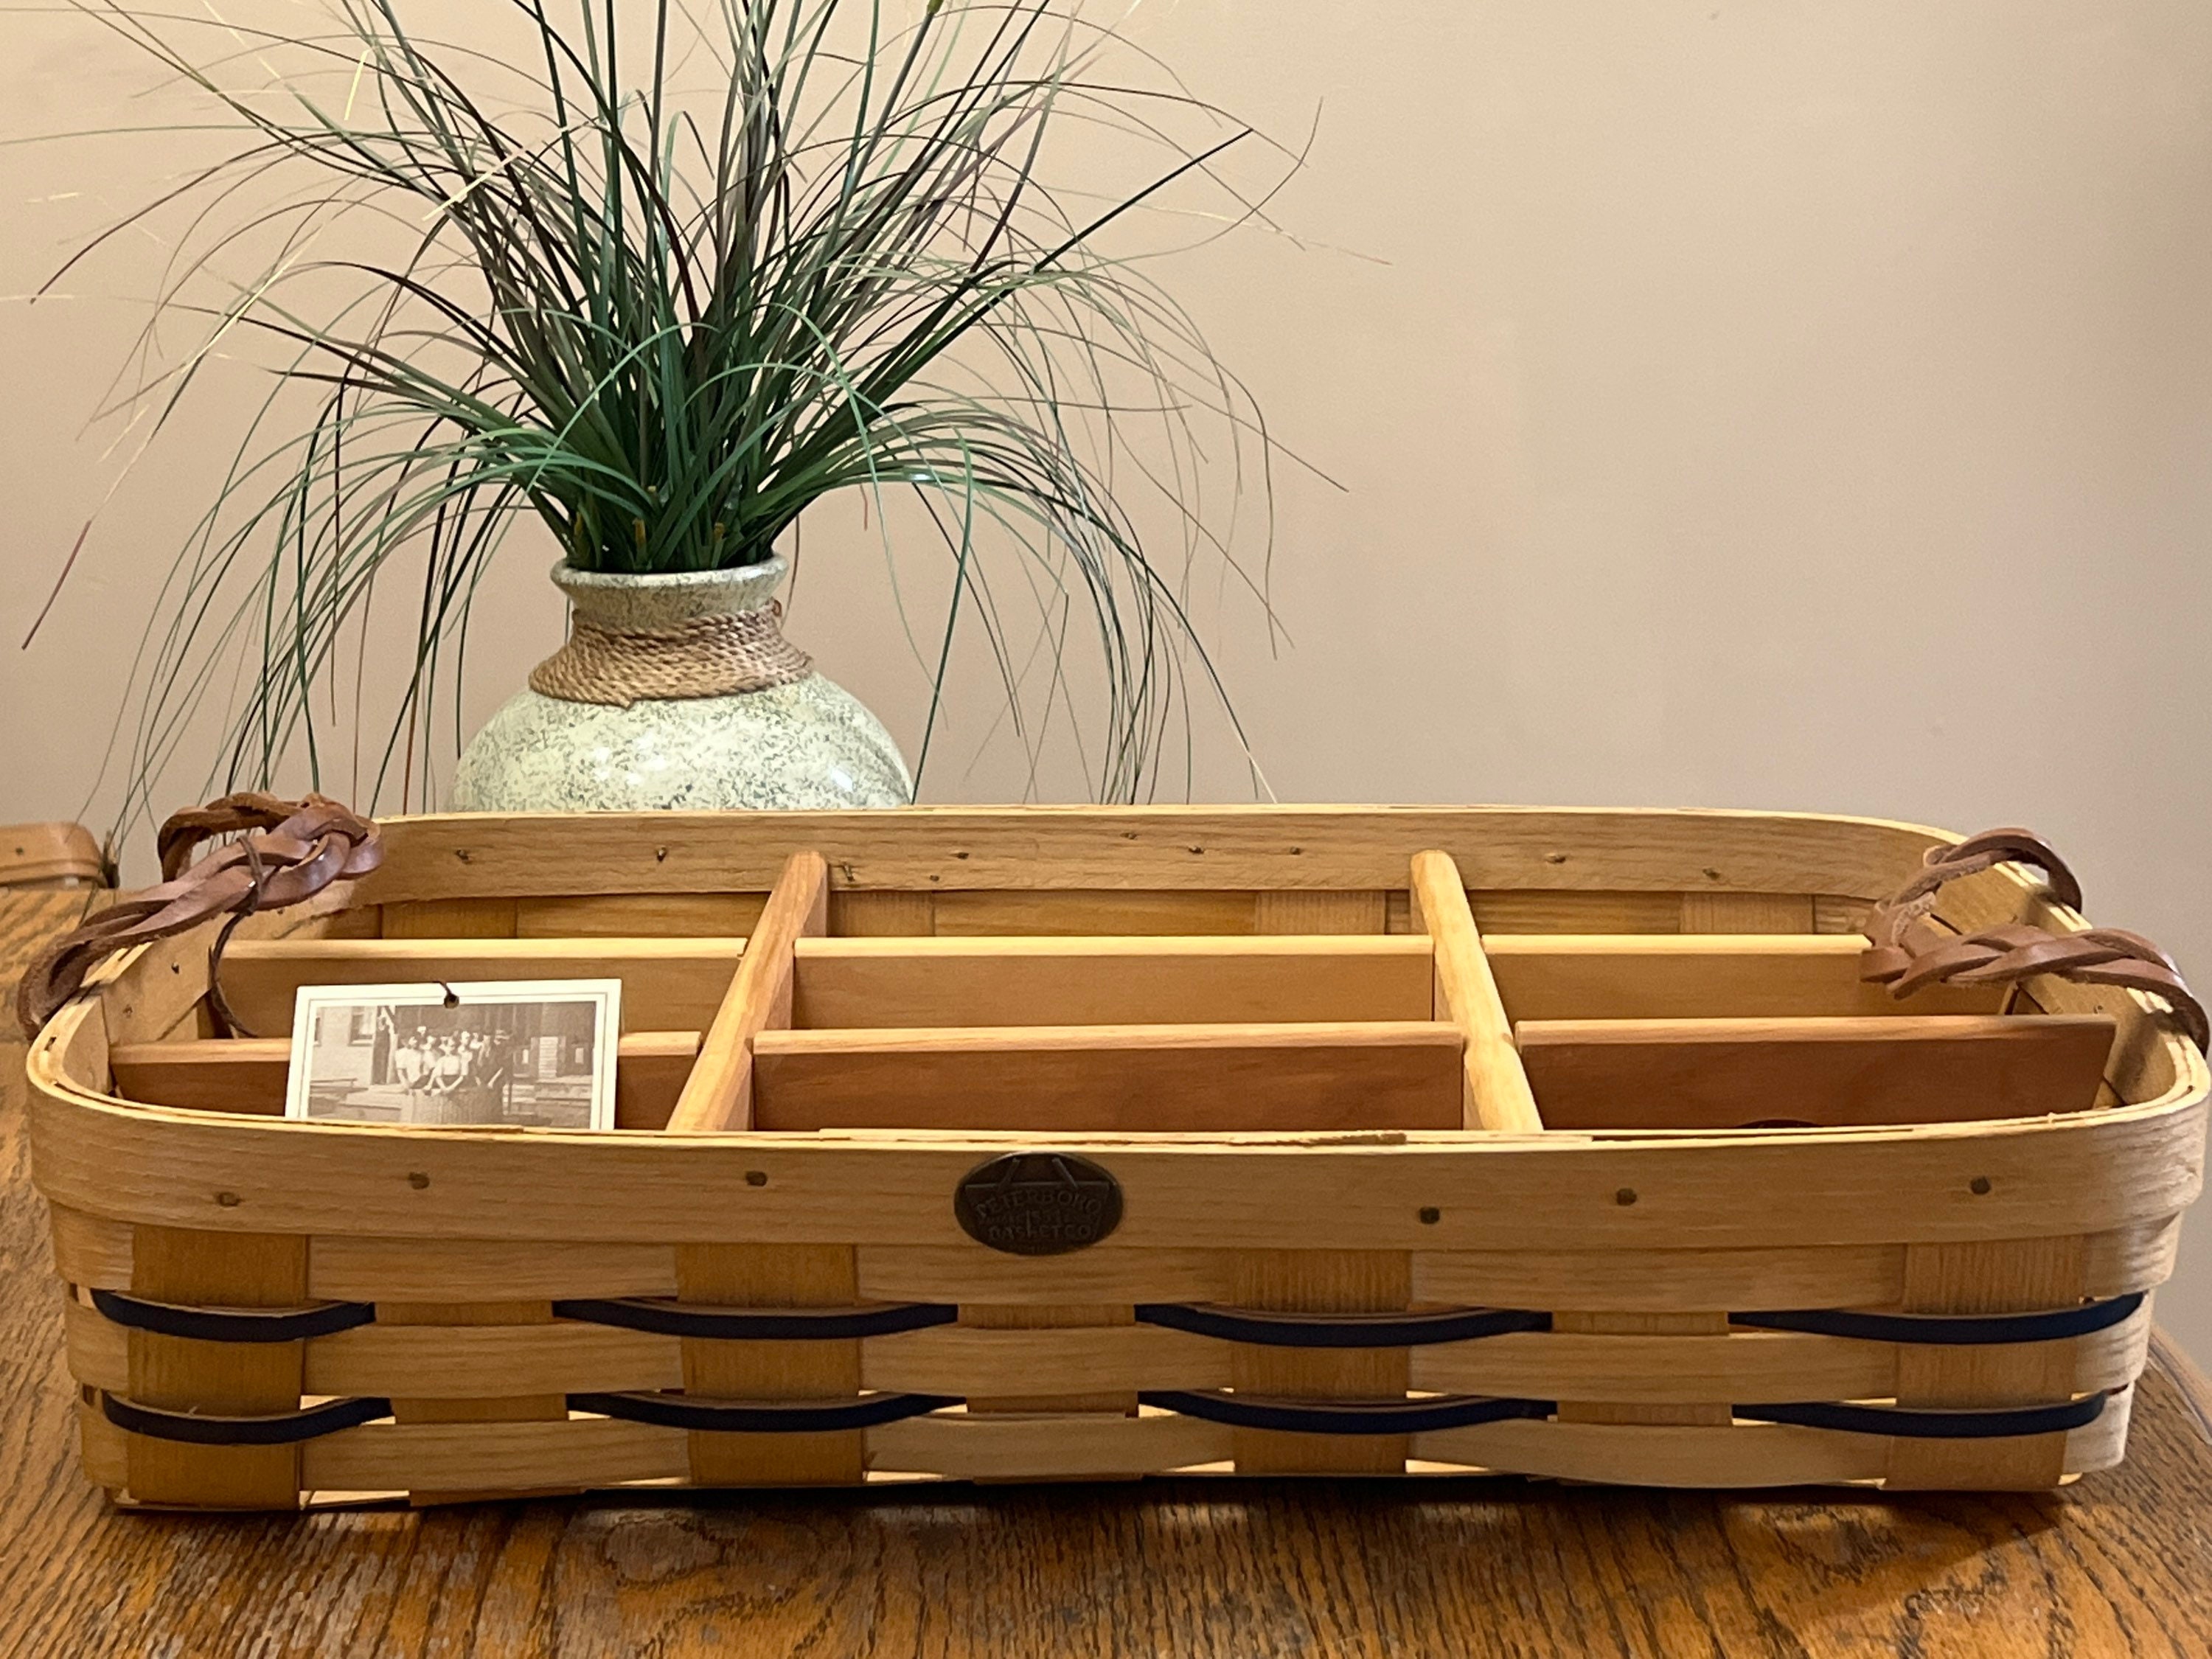 Peterboro Spoon Basket with Dividers 